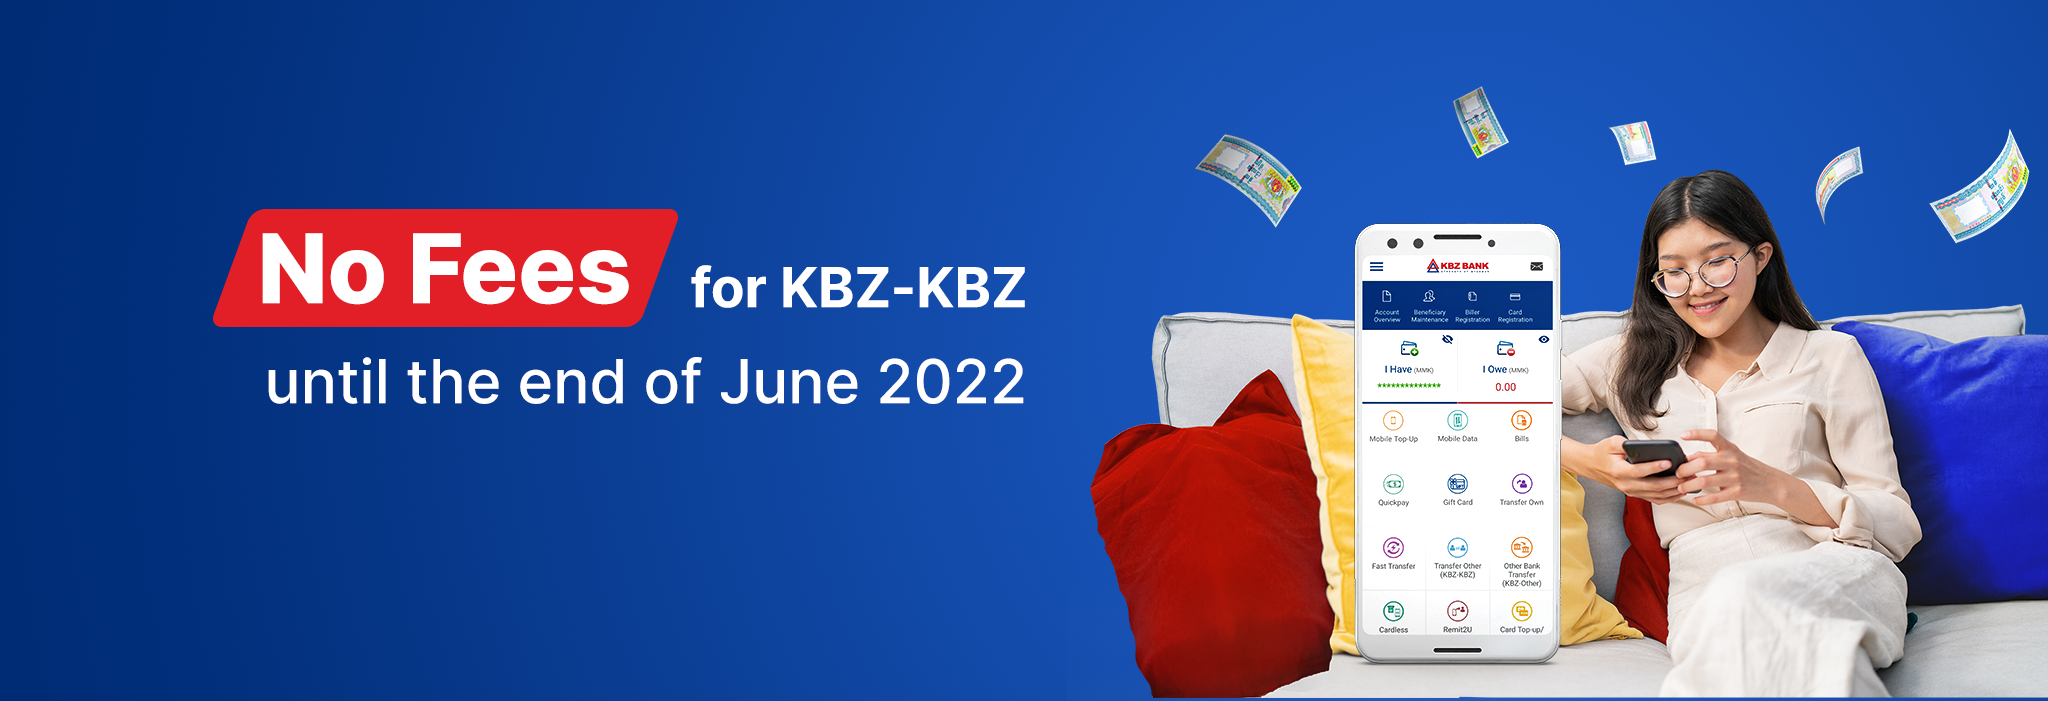 No Fees for KBZ-KBZ until the end of June 2022